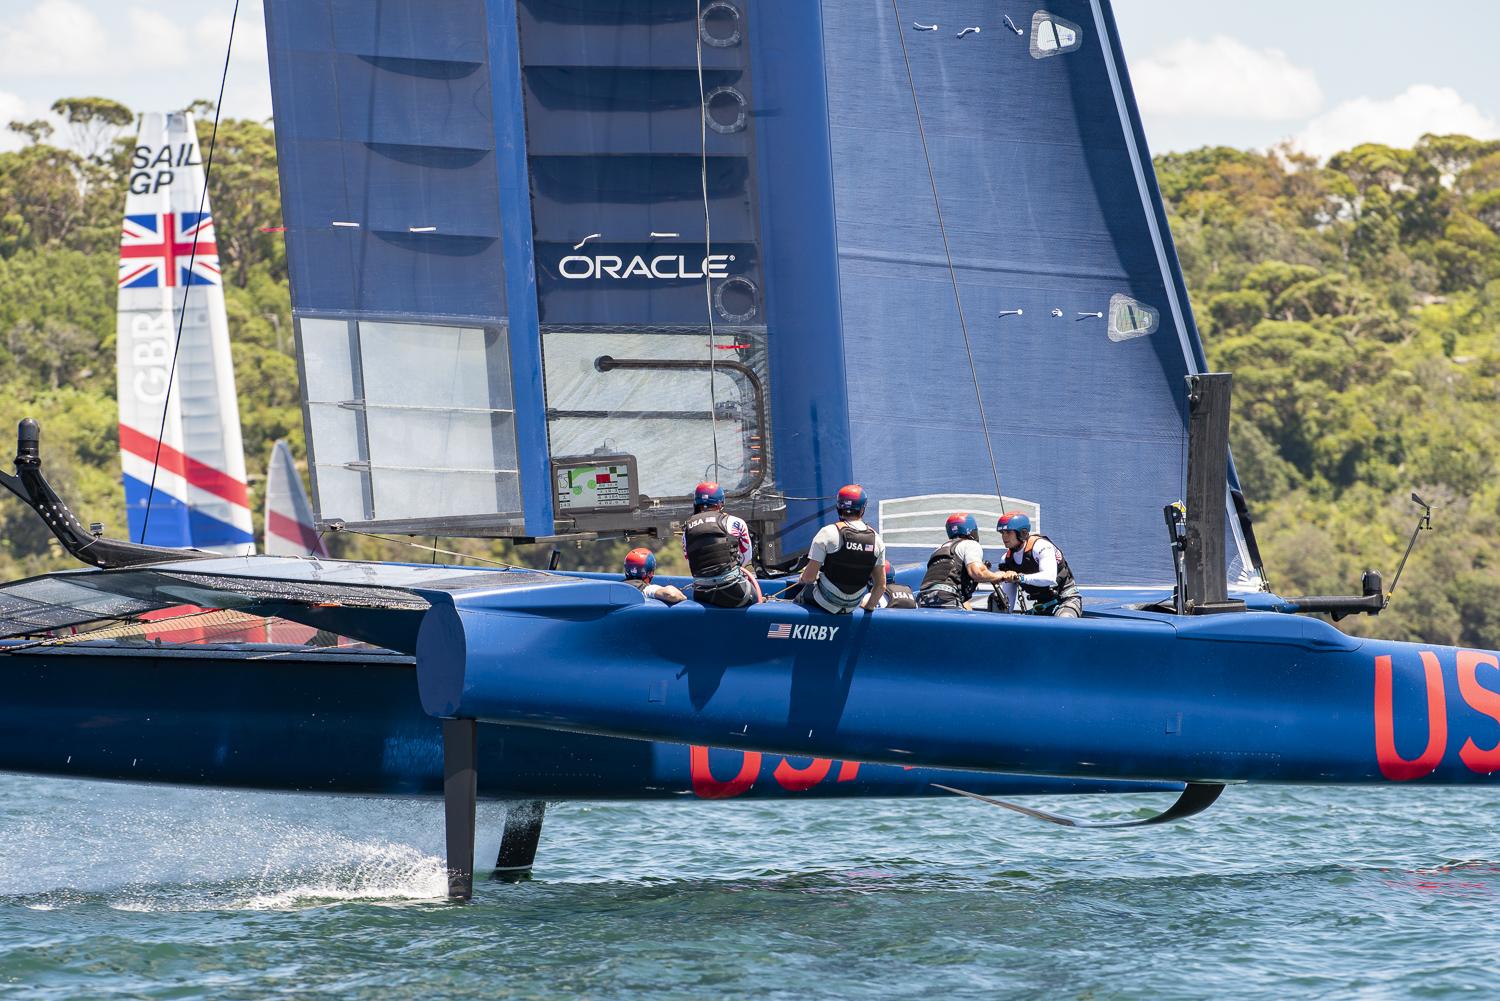 SailGP powered by wind and Oracle Cloud